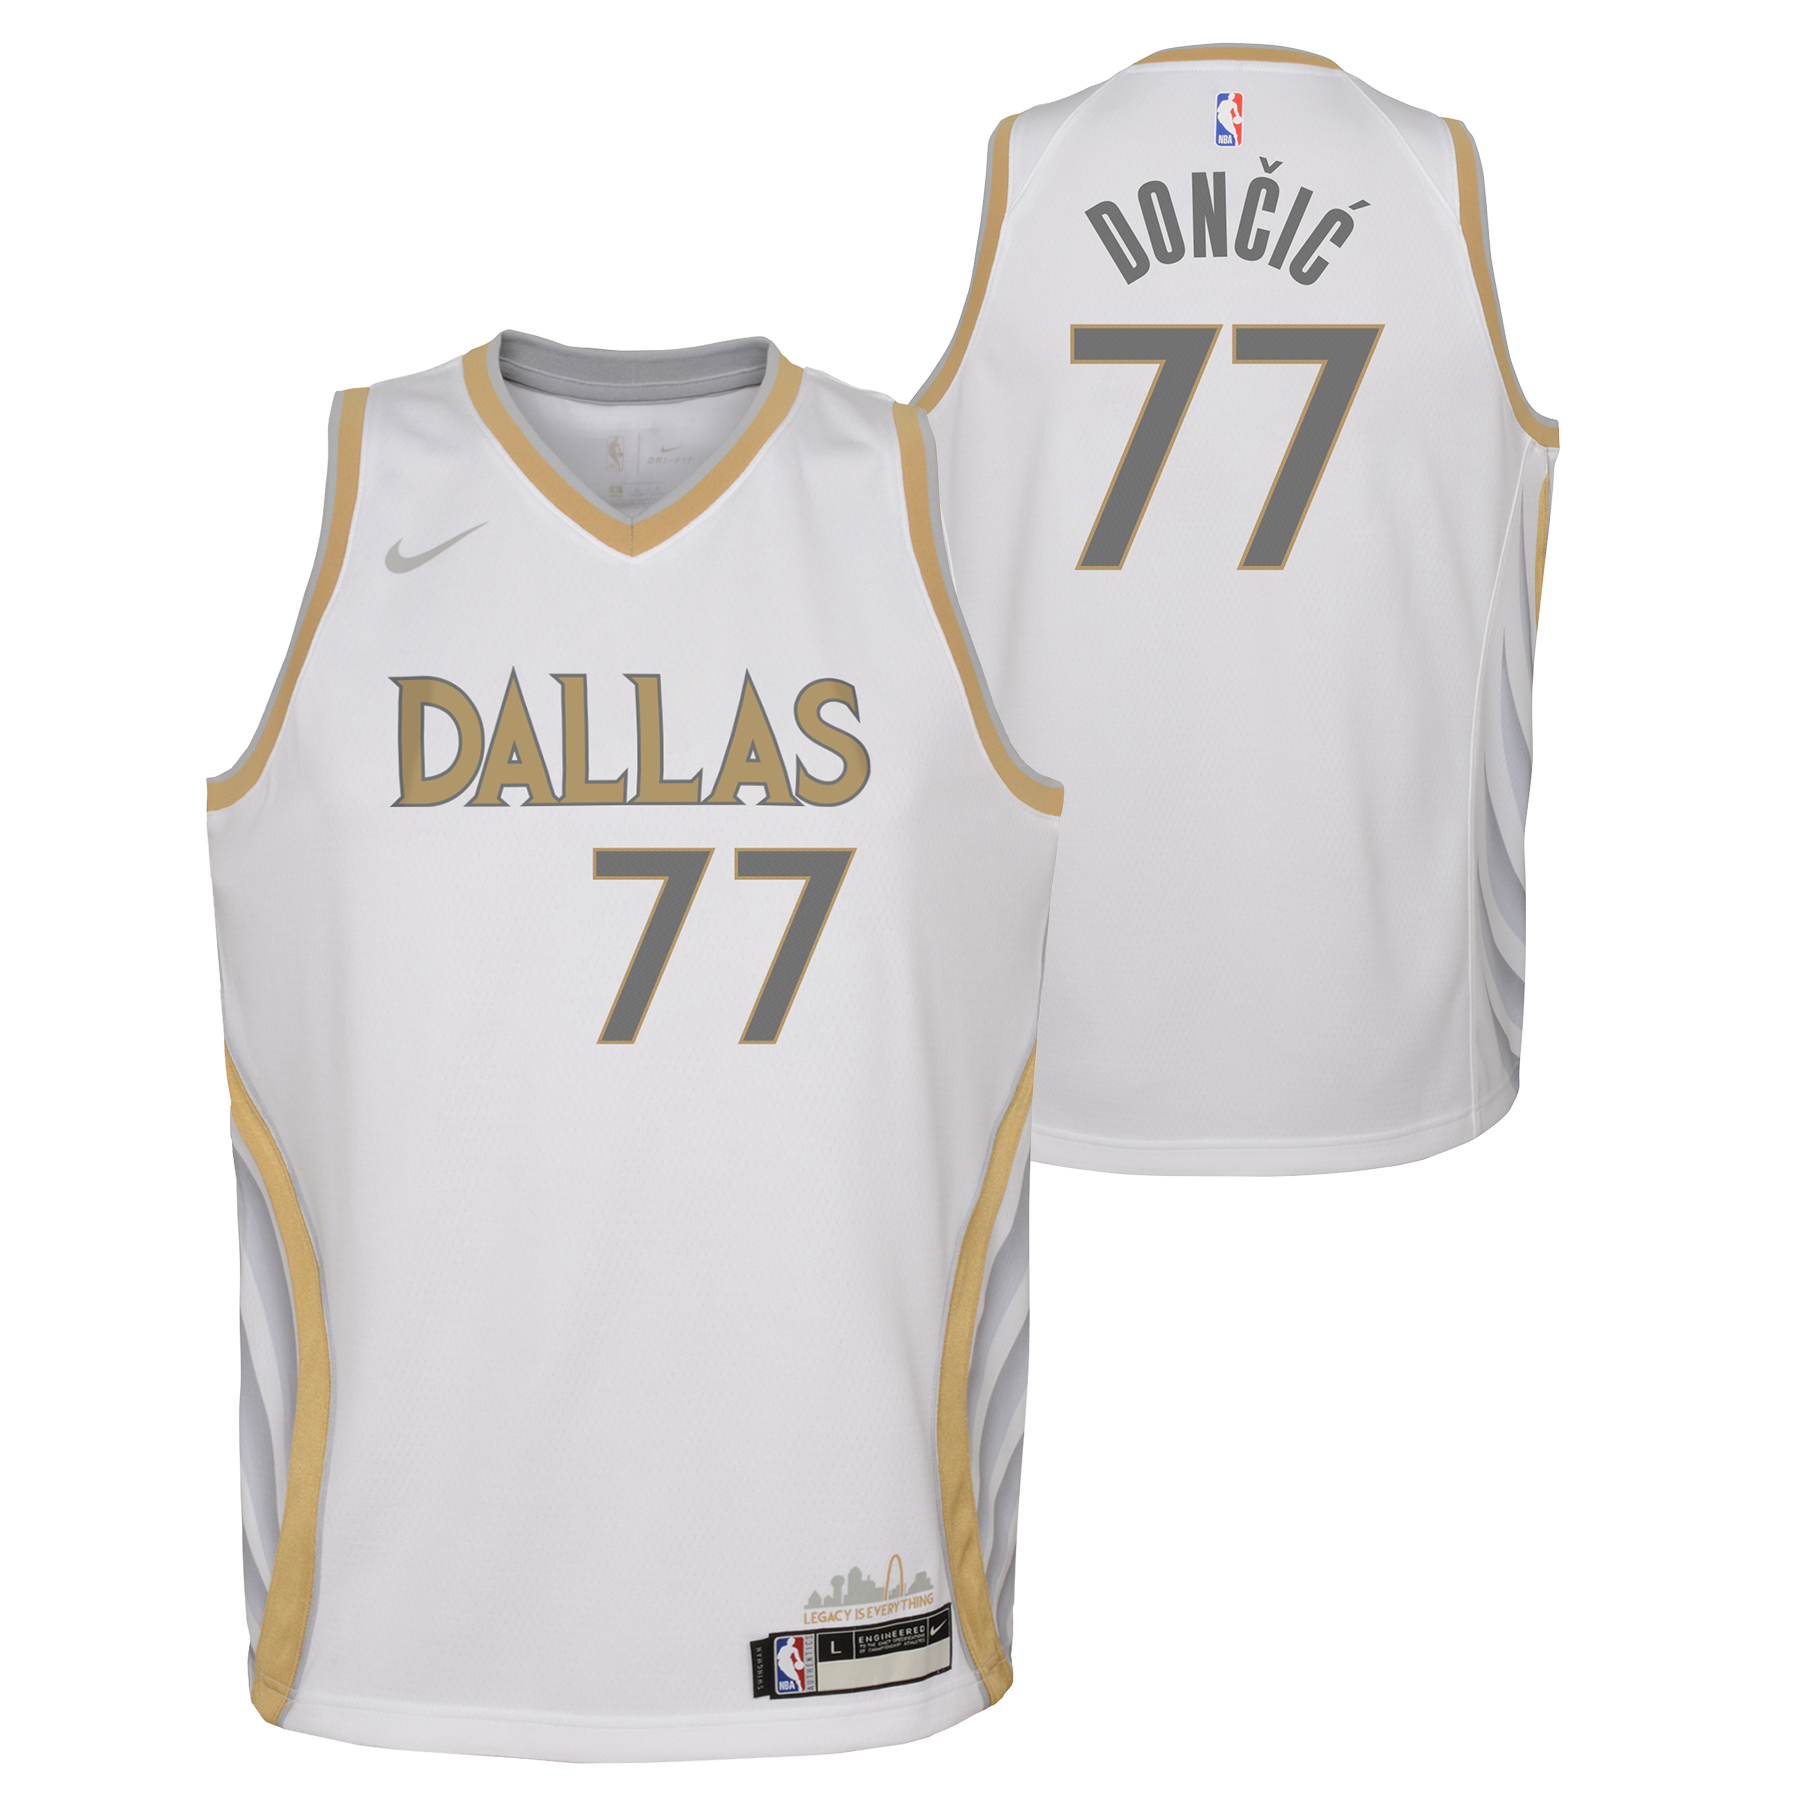 doncic city edition